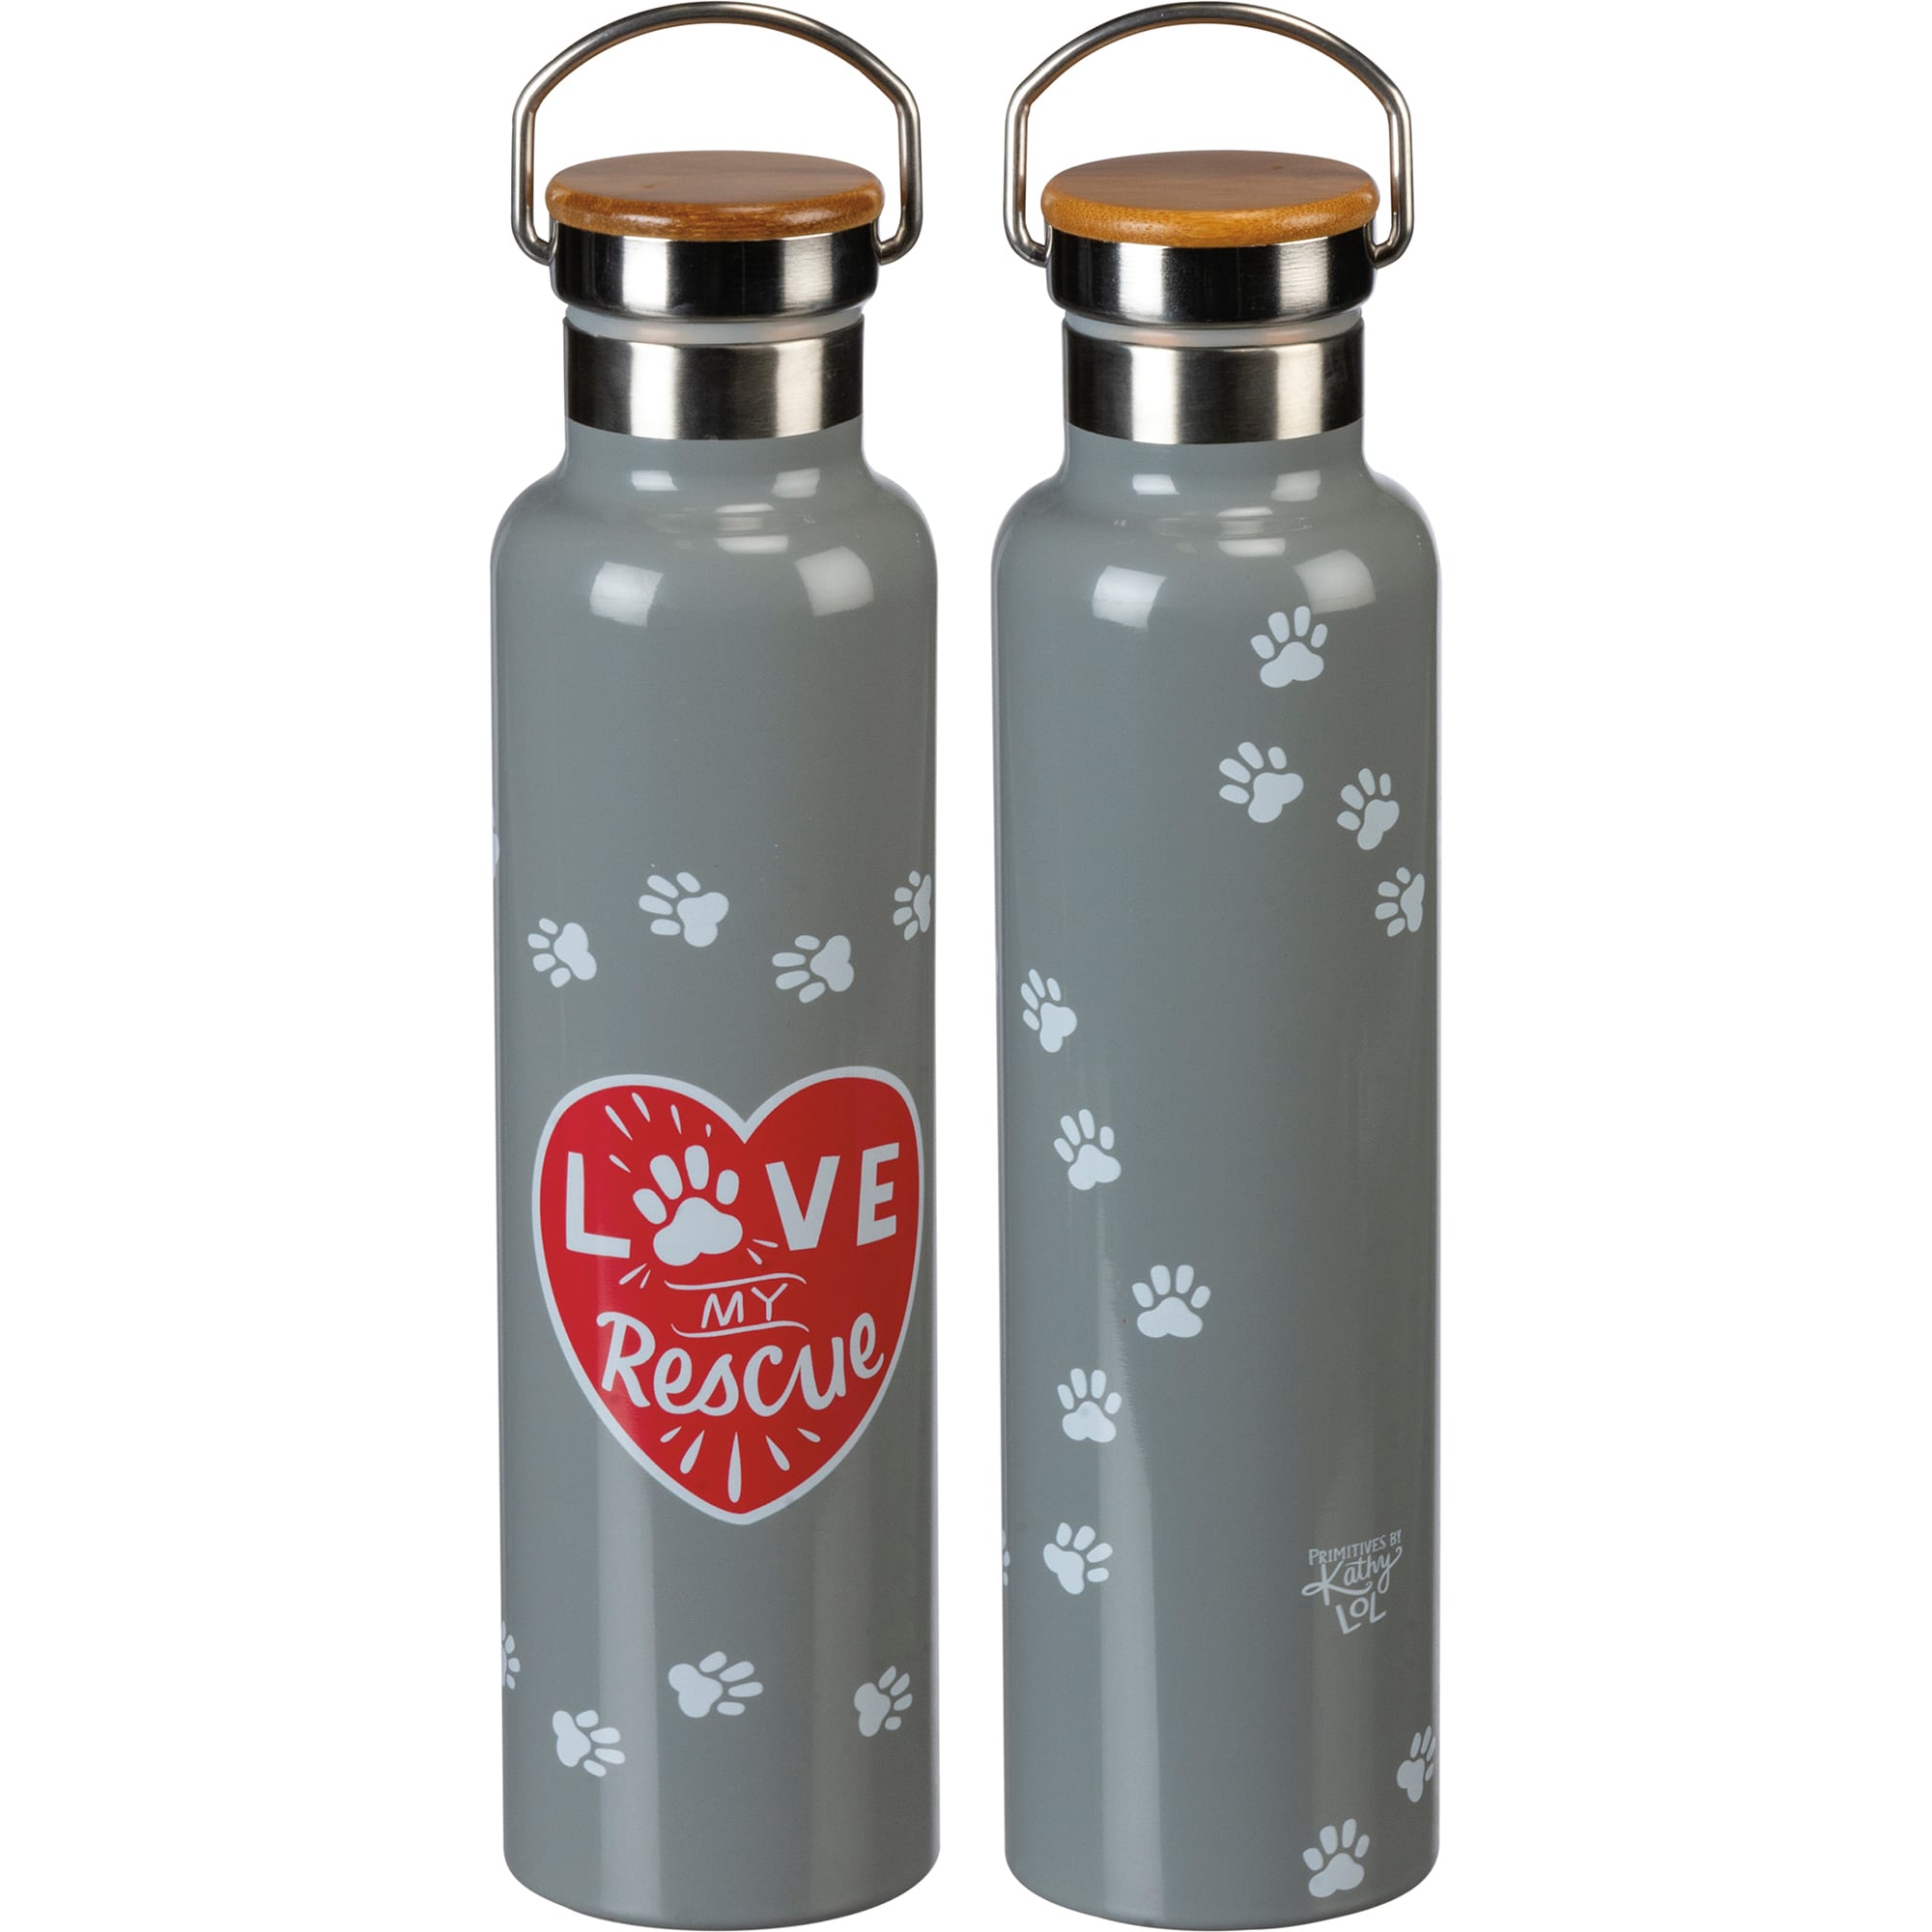 Primitives by Kathy Love My Rescue Insulated Water Bottle